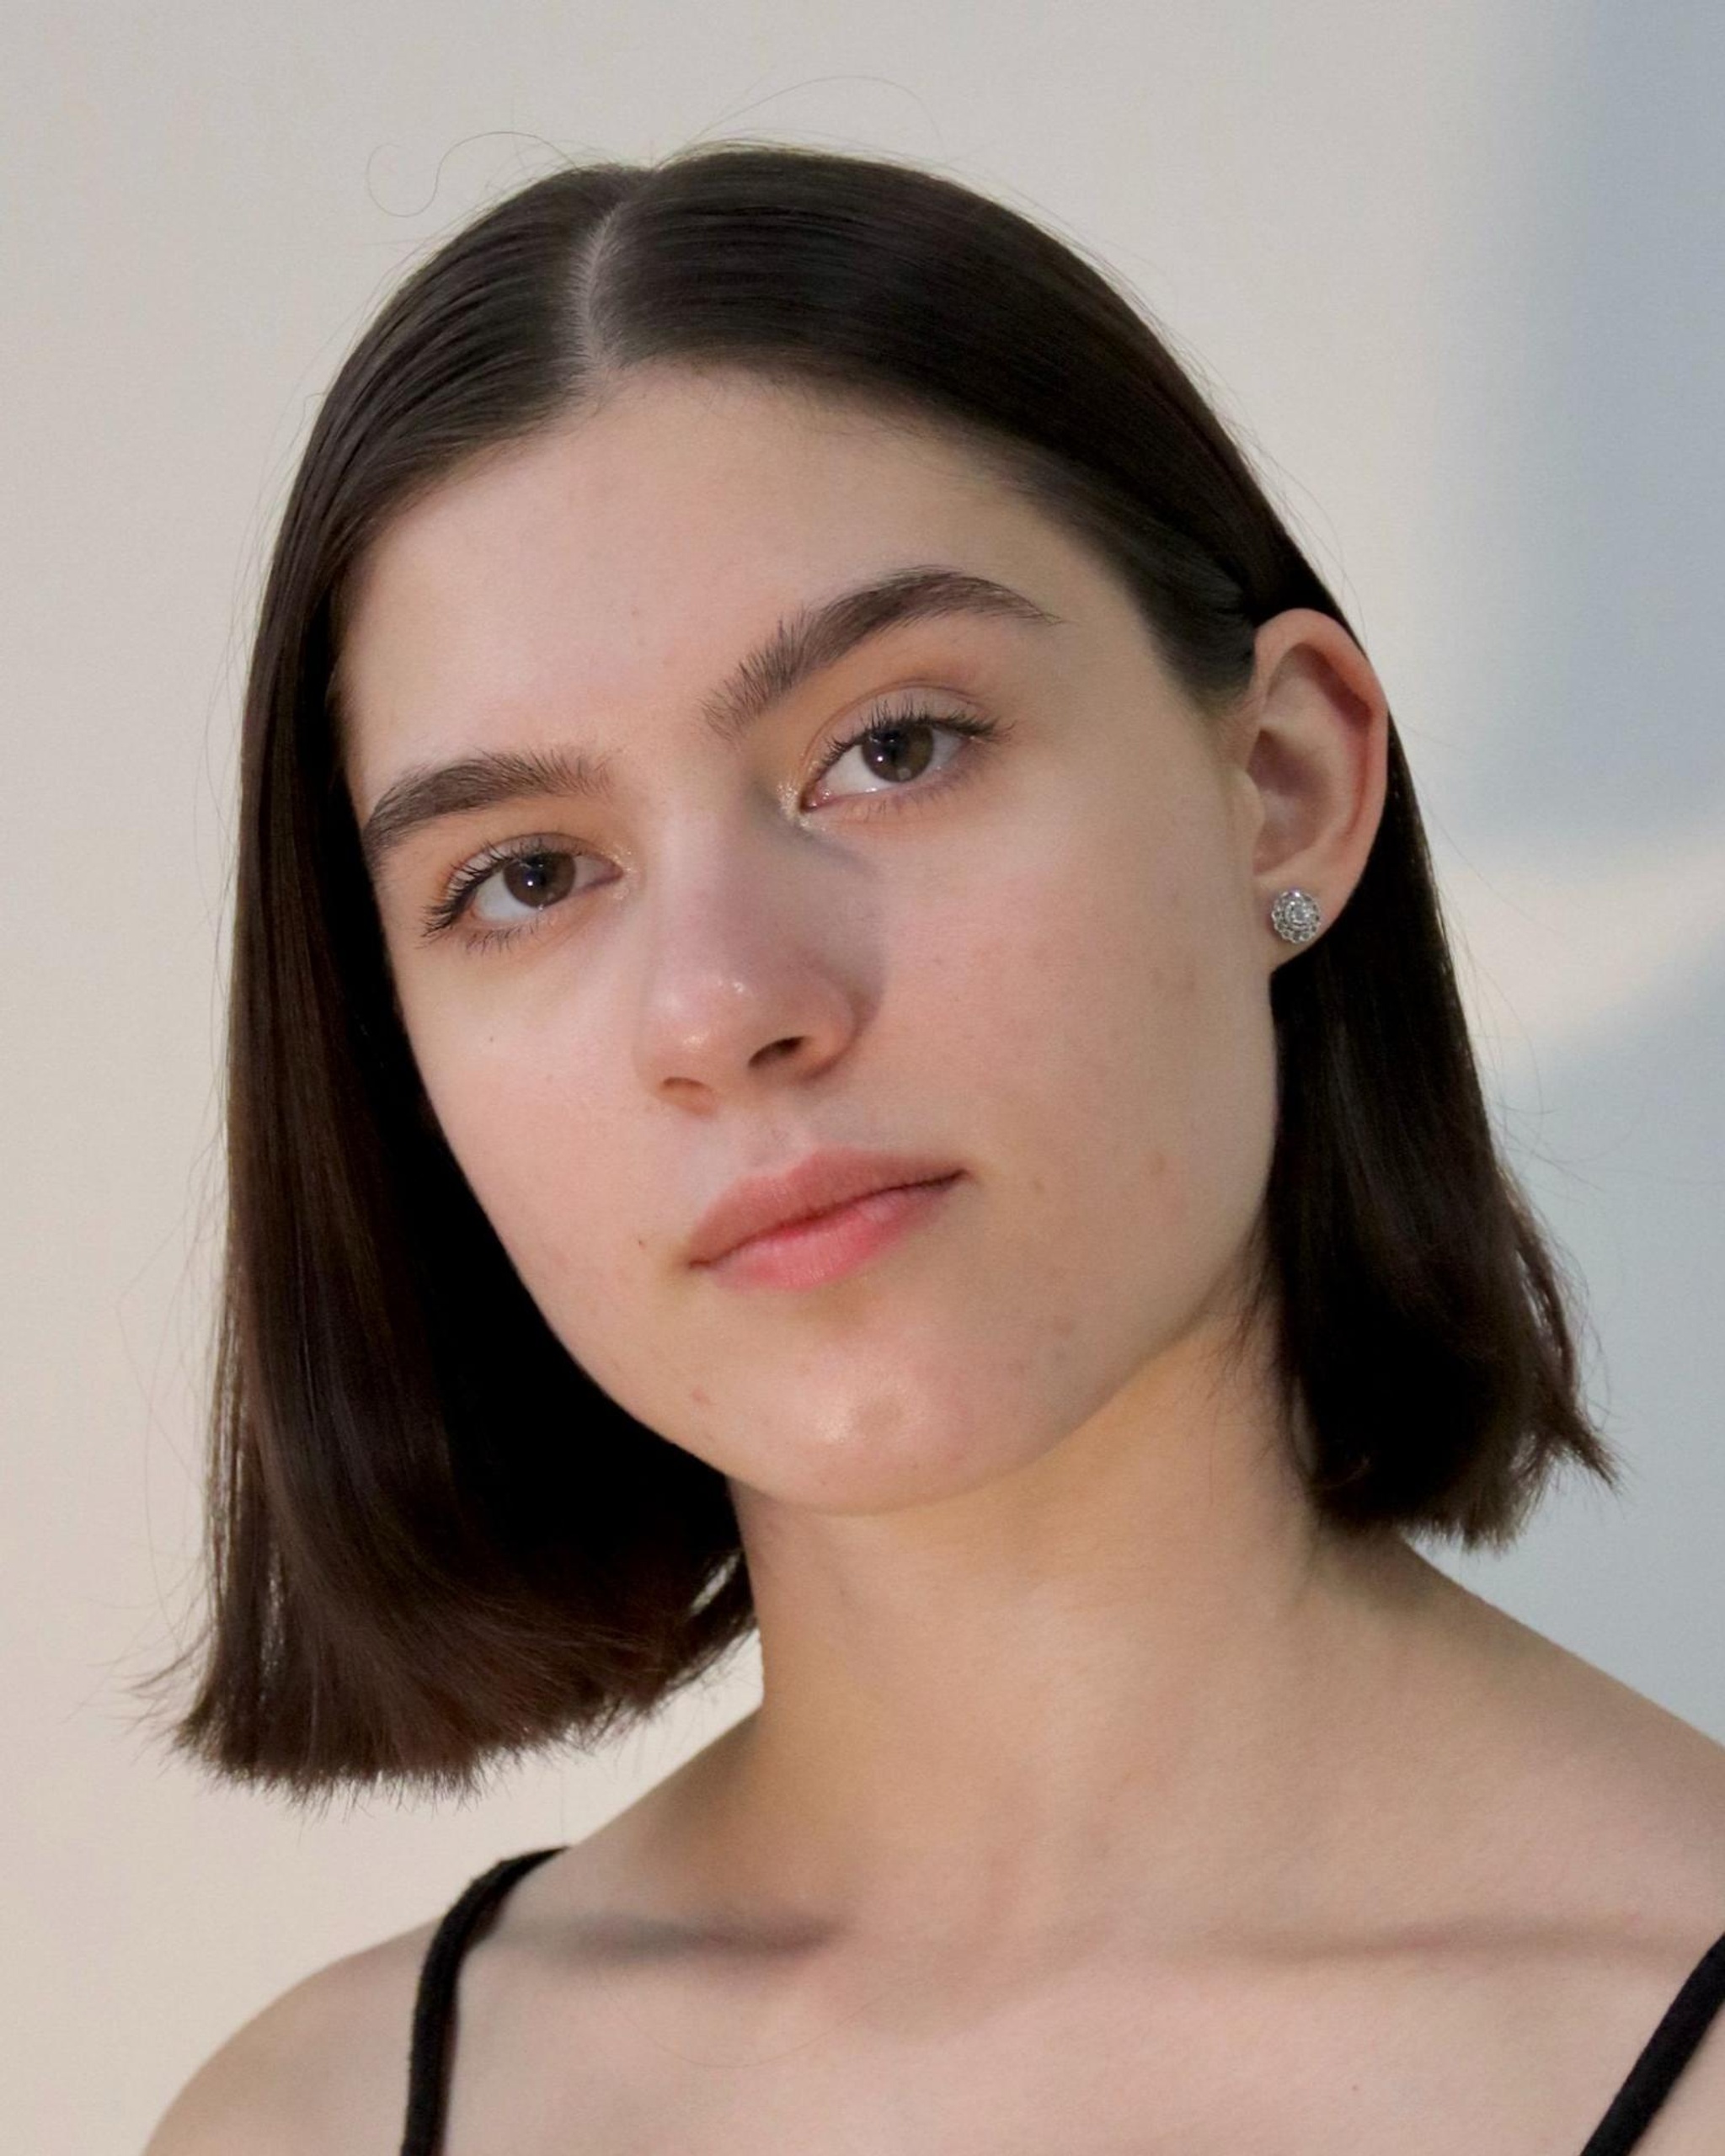 A headshot of dancer Marra Spallone, a white woman with straight brown hair cut just above her shoulders. She looks directly at us, tilting her head with one eyebrow raised. 